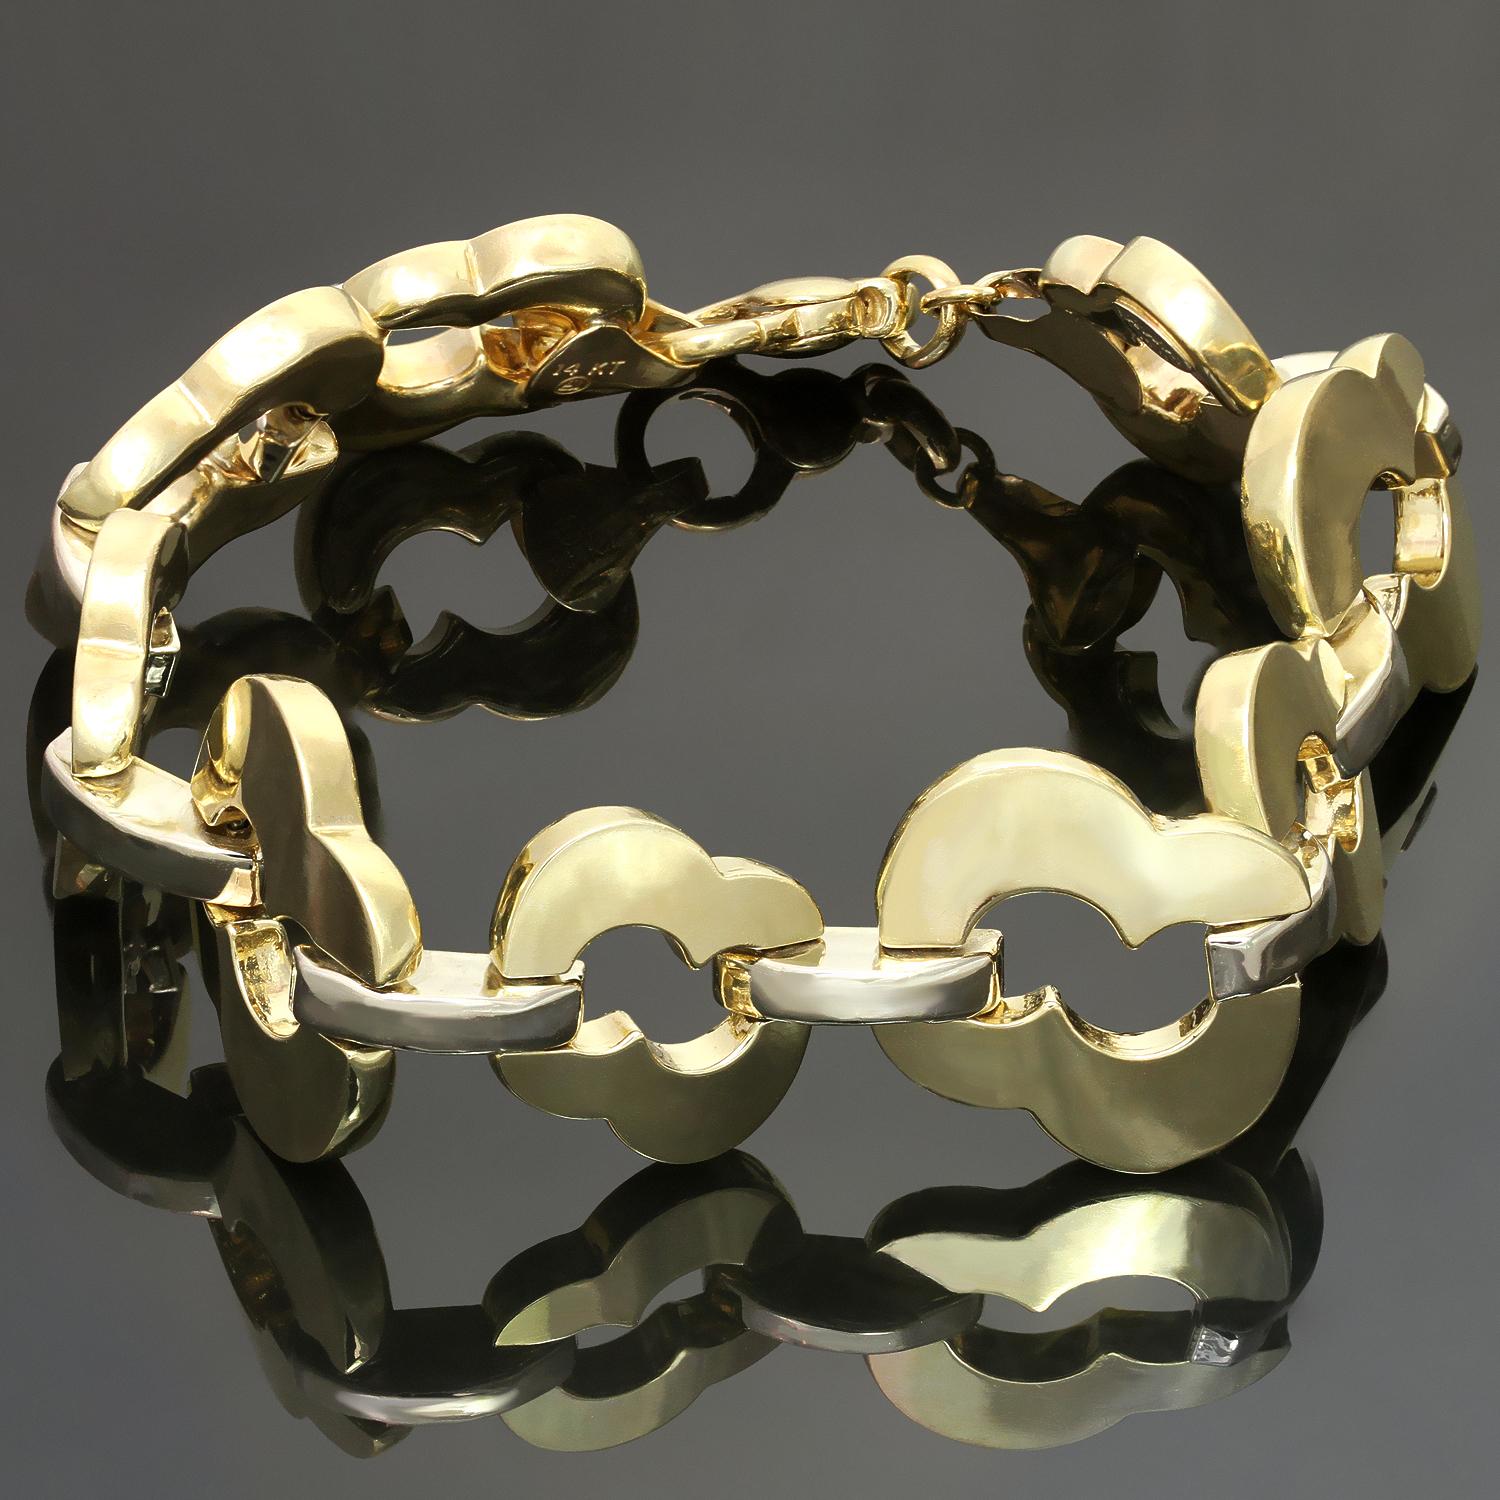 This chic Baraka bracelet features geometric links crafted in 14k white and yellow gold. Made in Italy circa 1990s. Measurements: 0.82